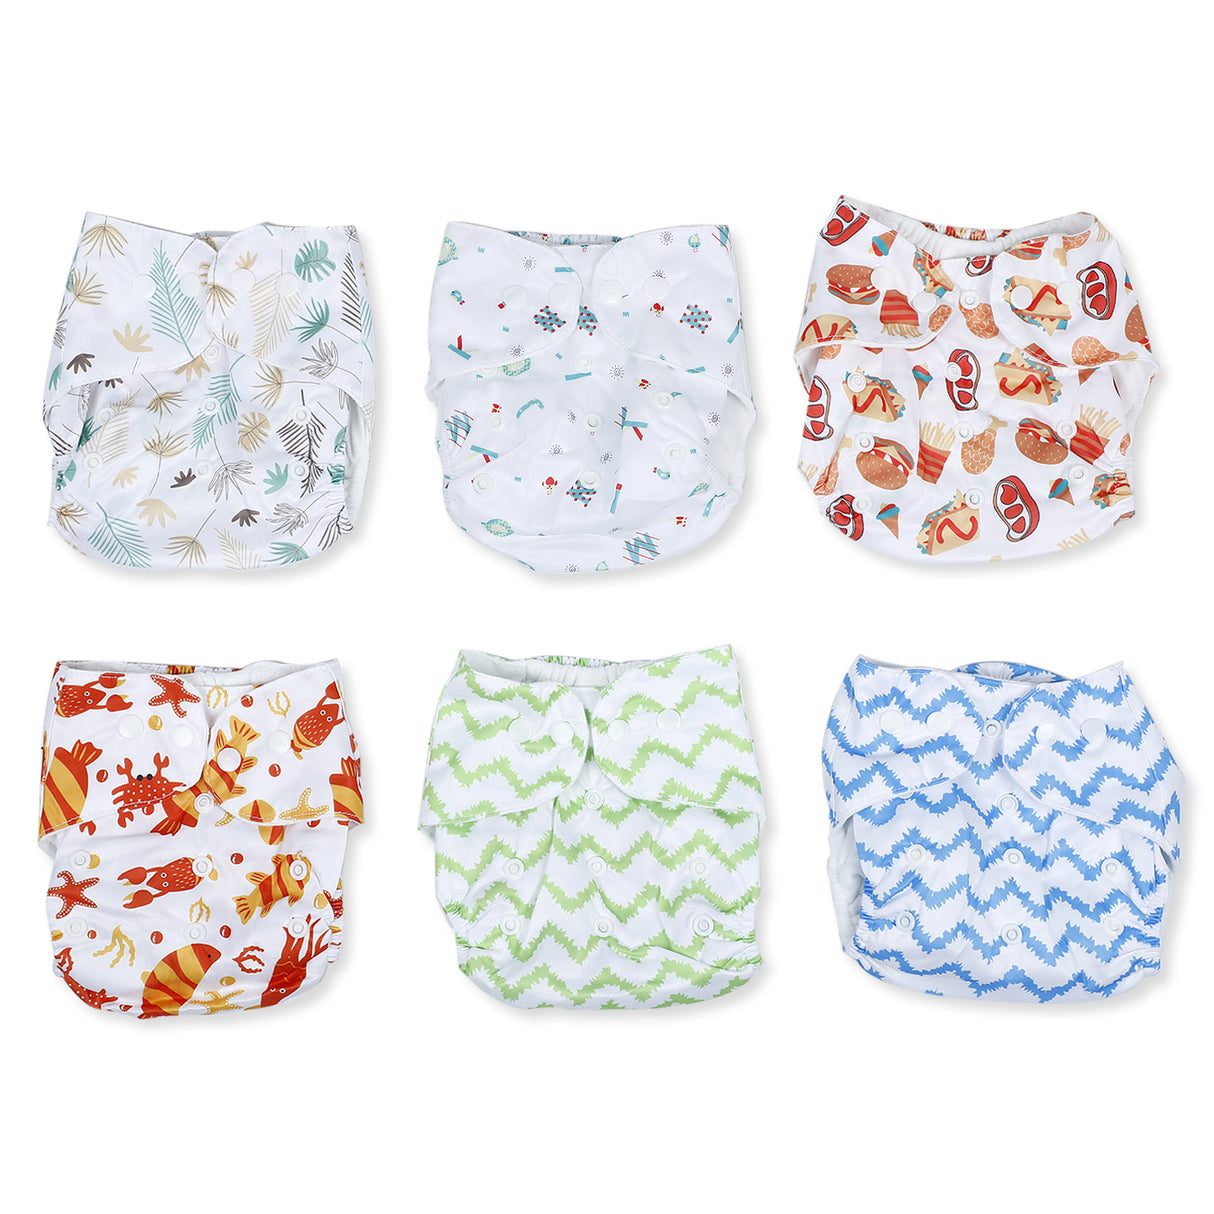 Adjustable And Washable Cloth Diaper